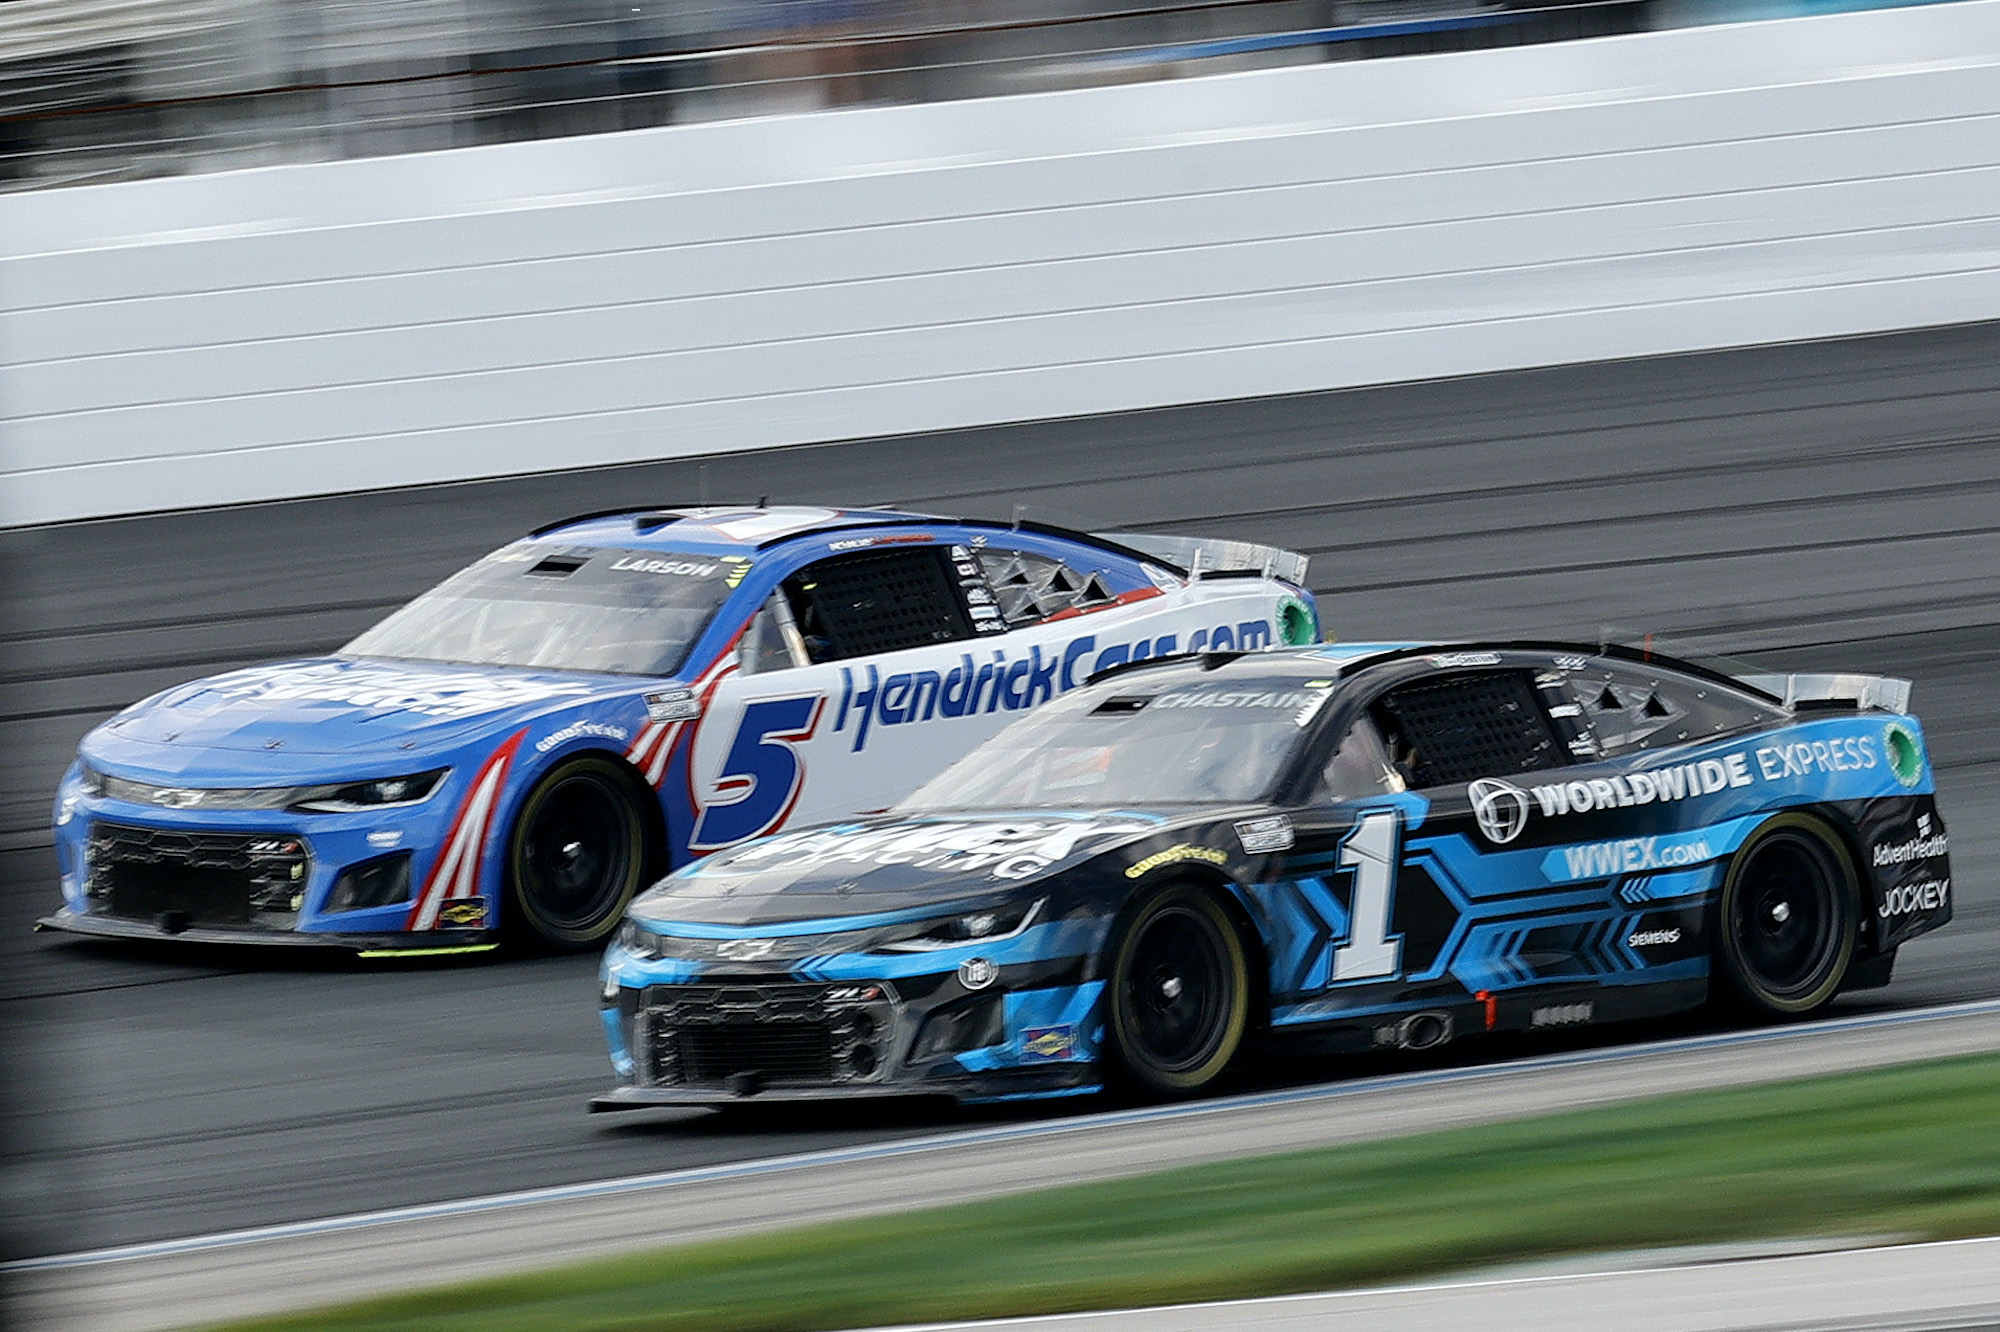 Ross Chastain and Kyle Larson race